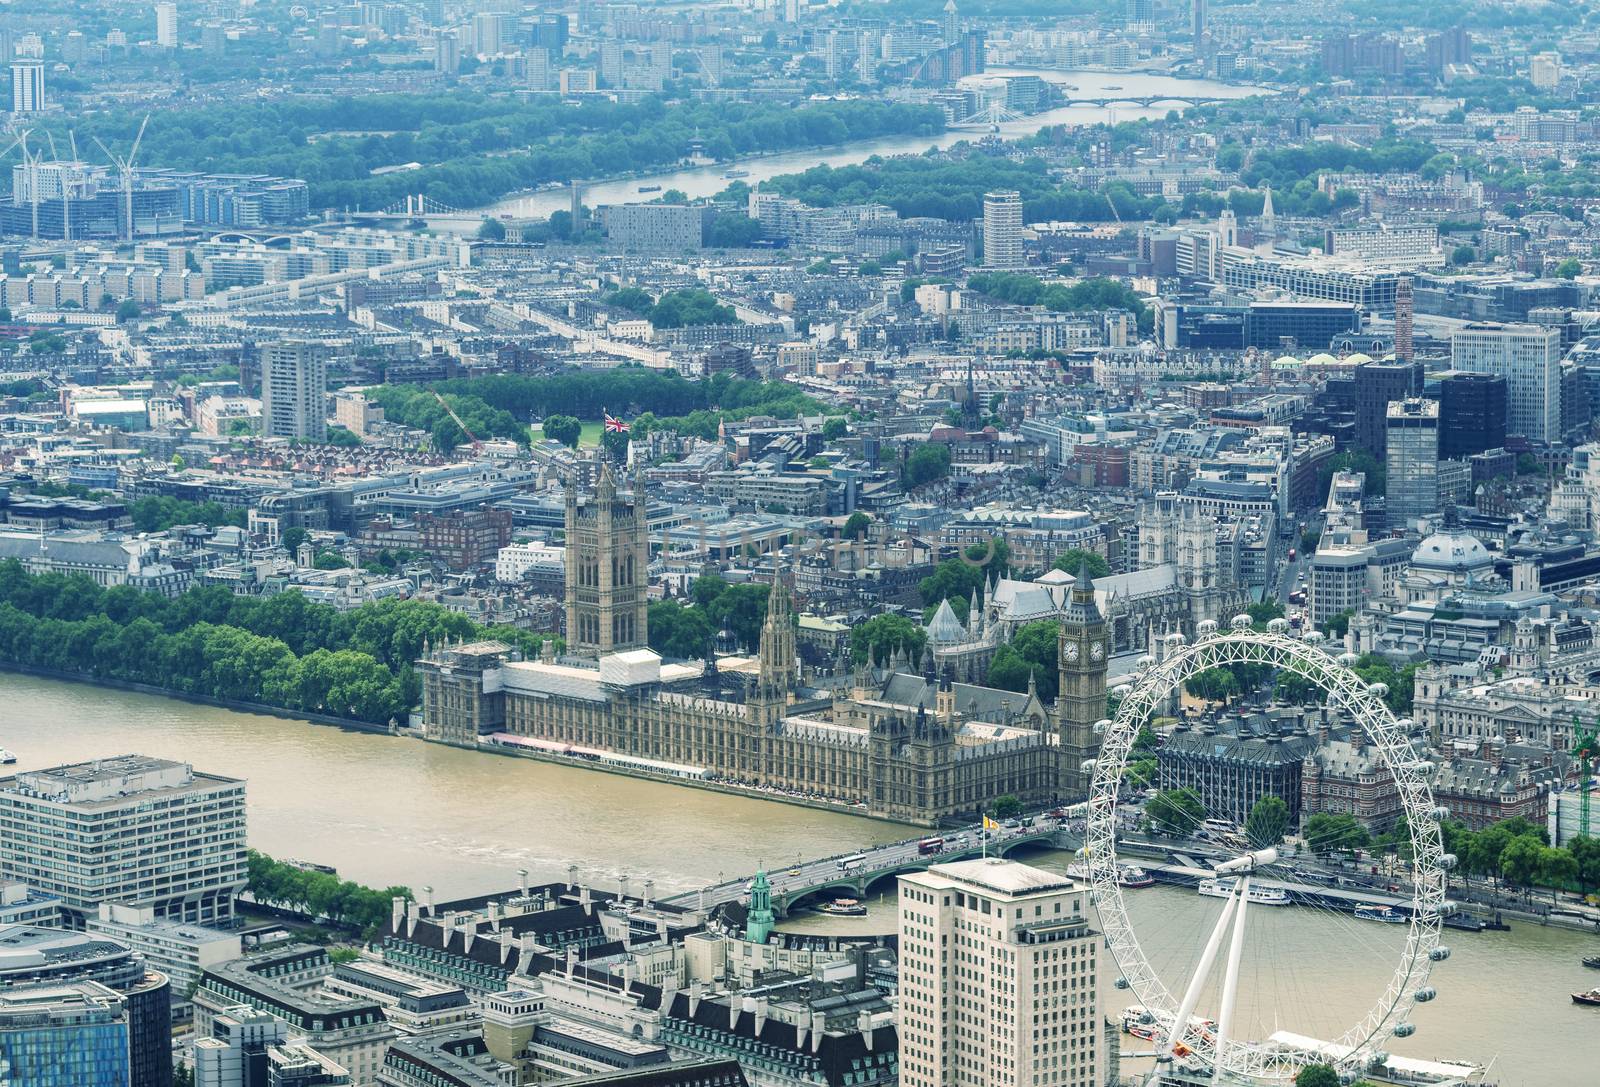 Helicopter view of Houses of Parliament and Westminster area, London - UK.